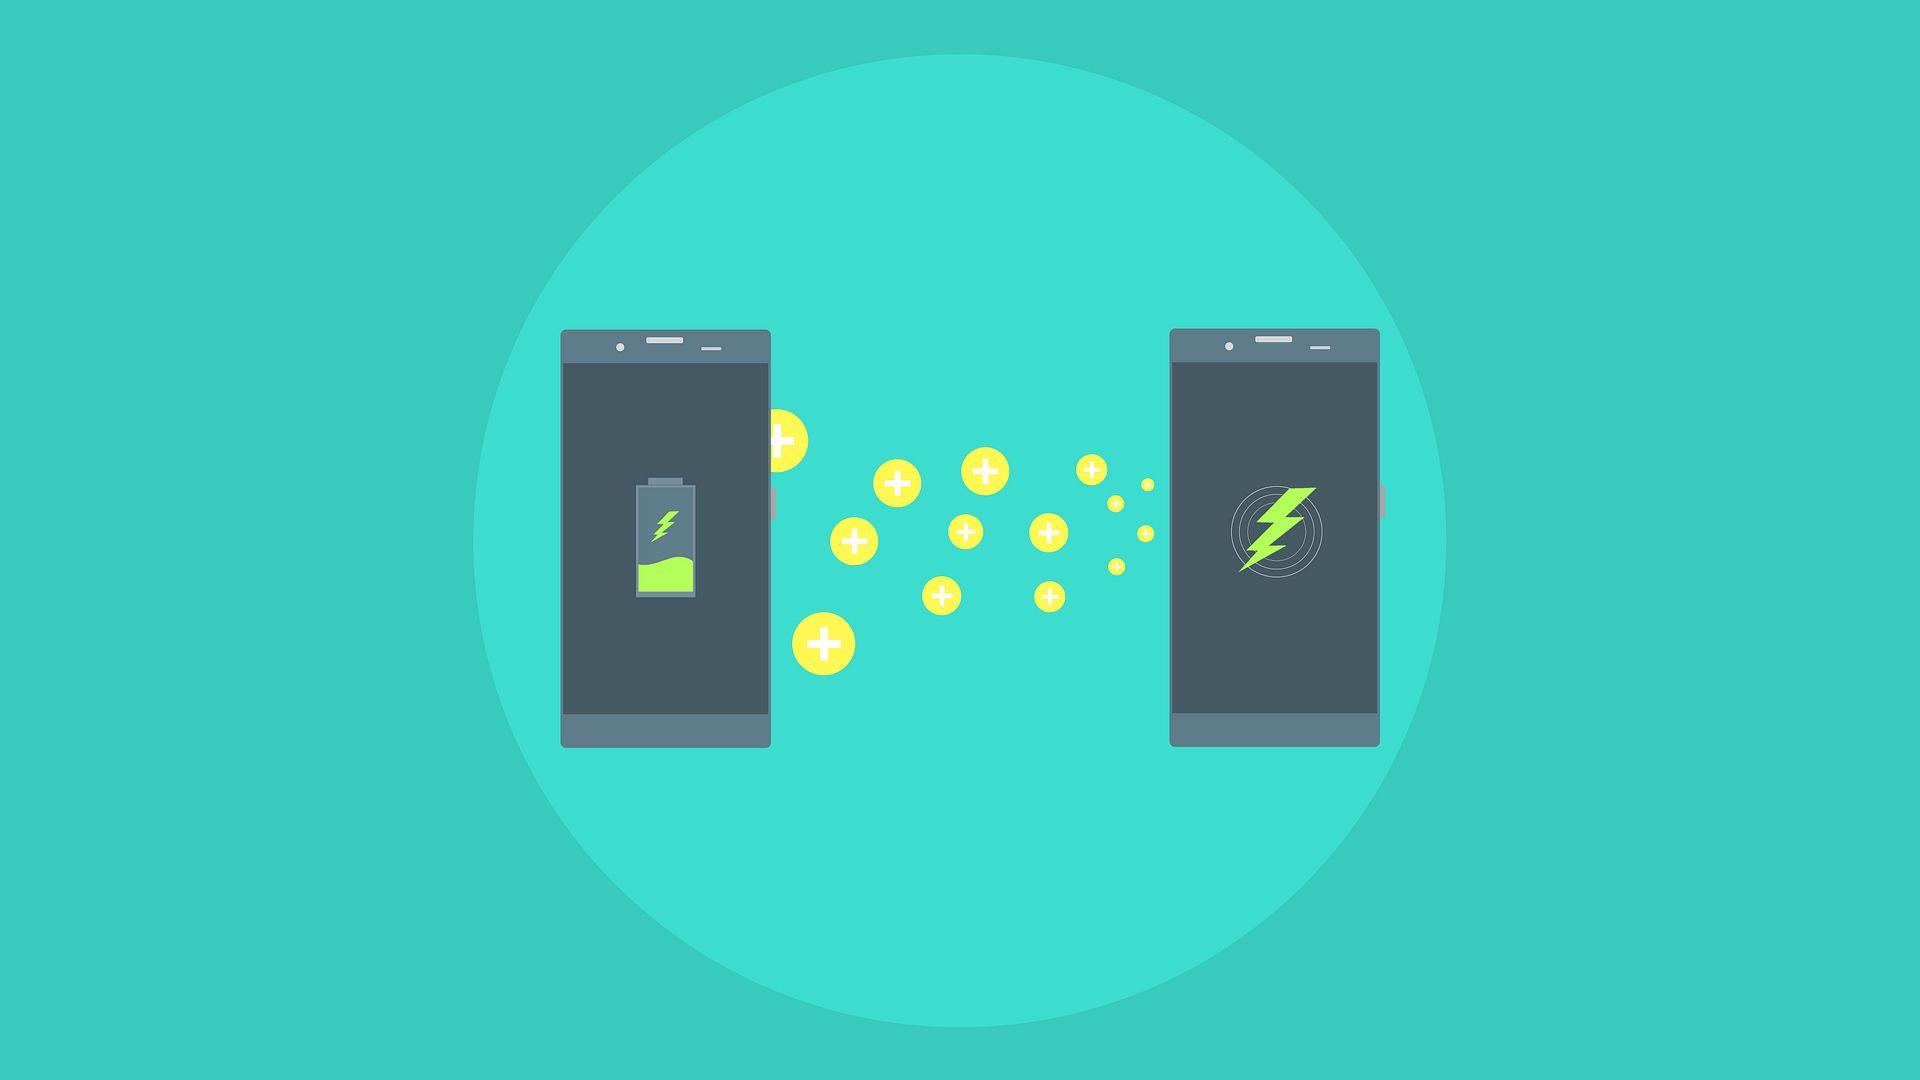 Two phones with battery and lightning bolt symbol on a blue green background